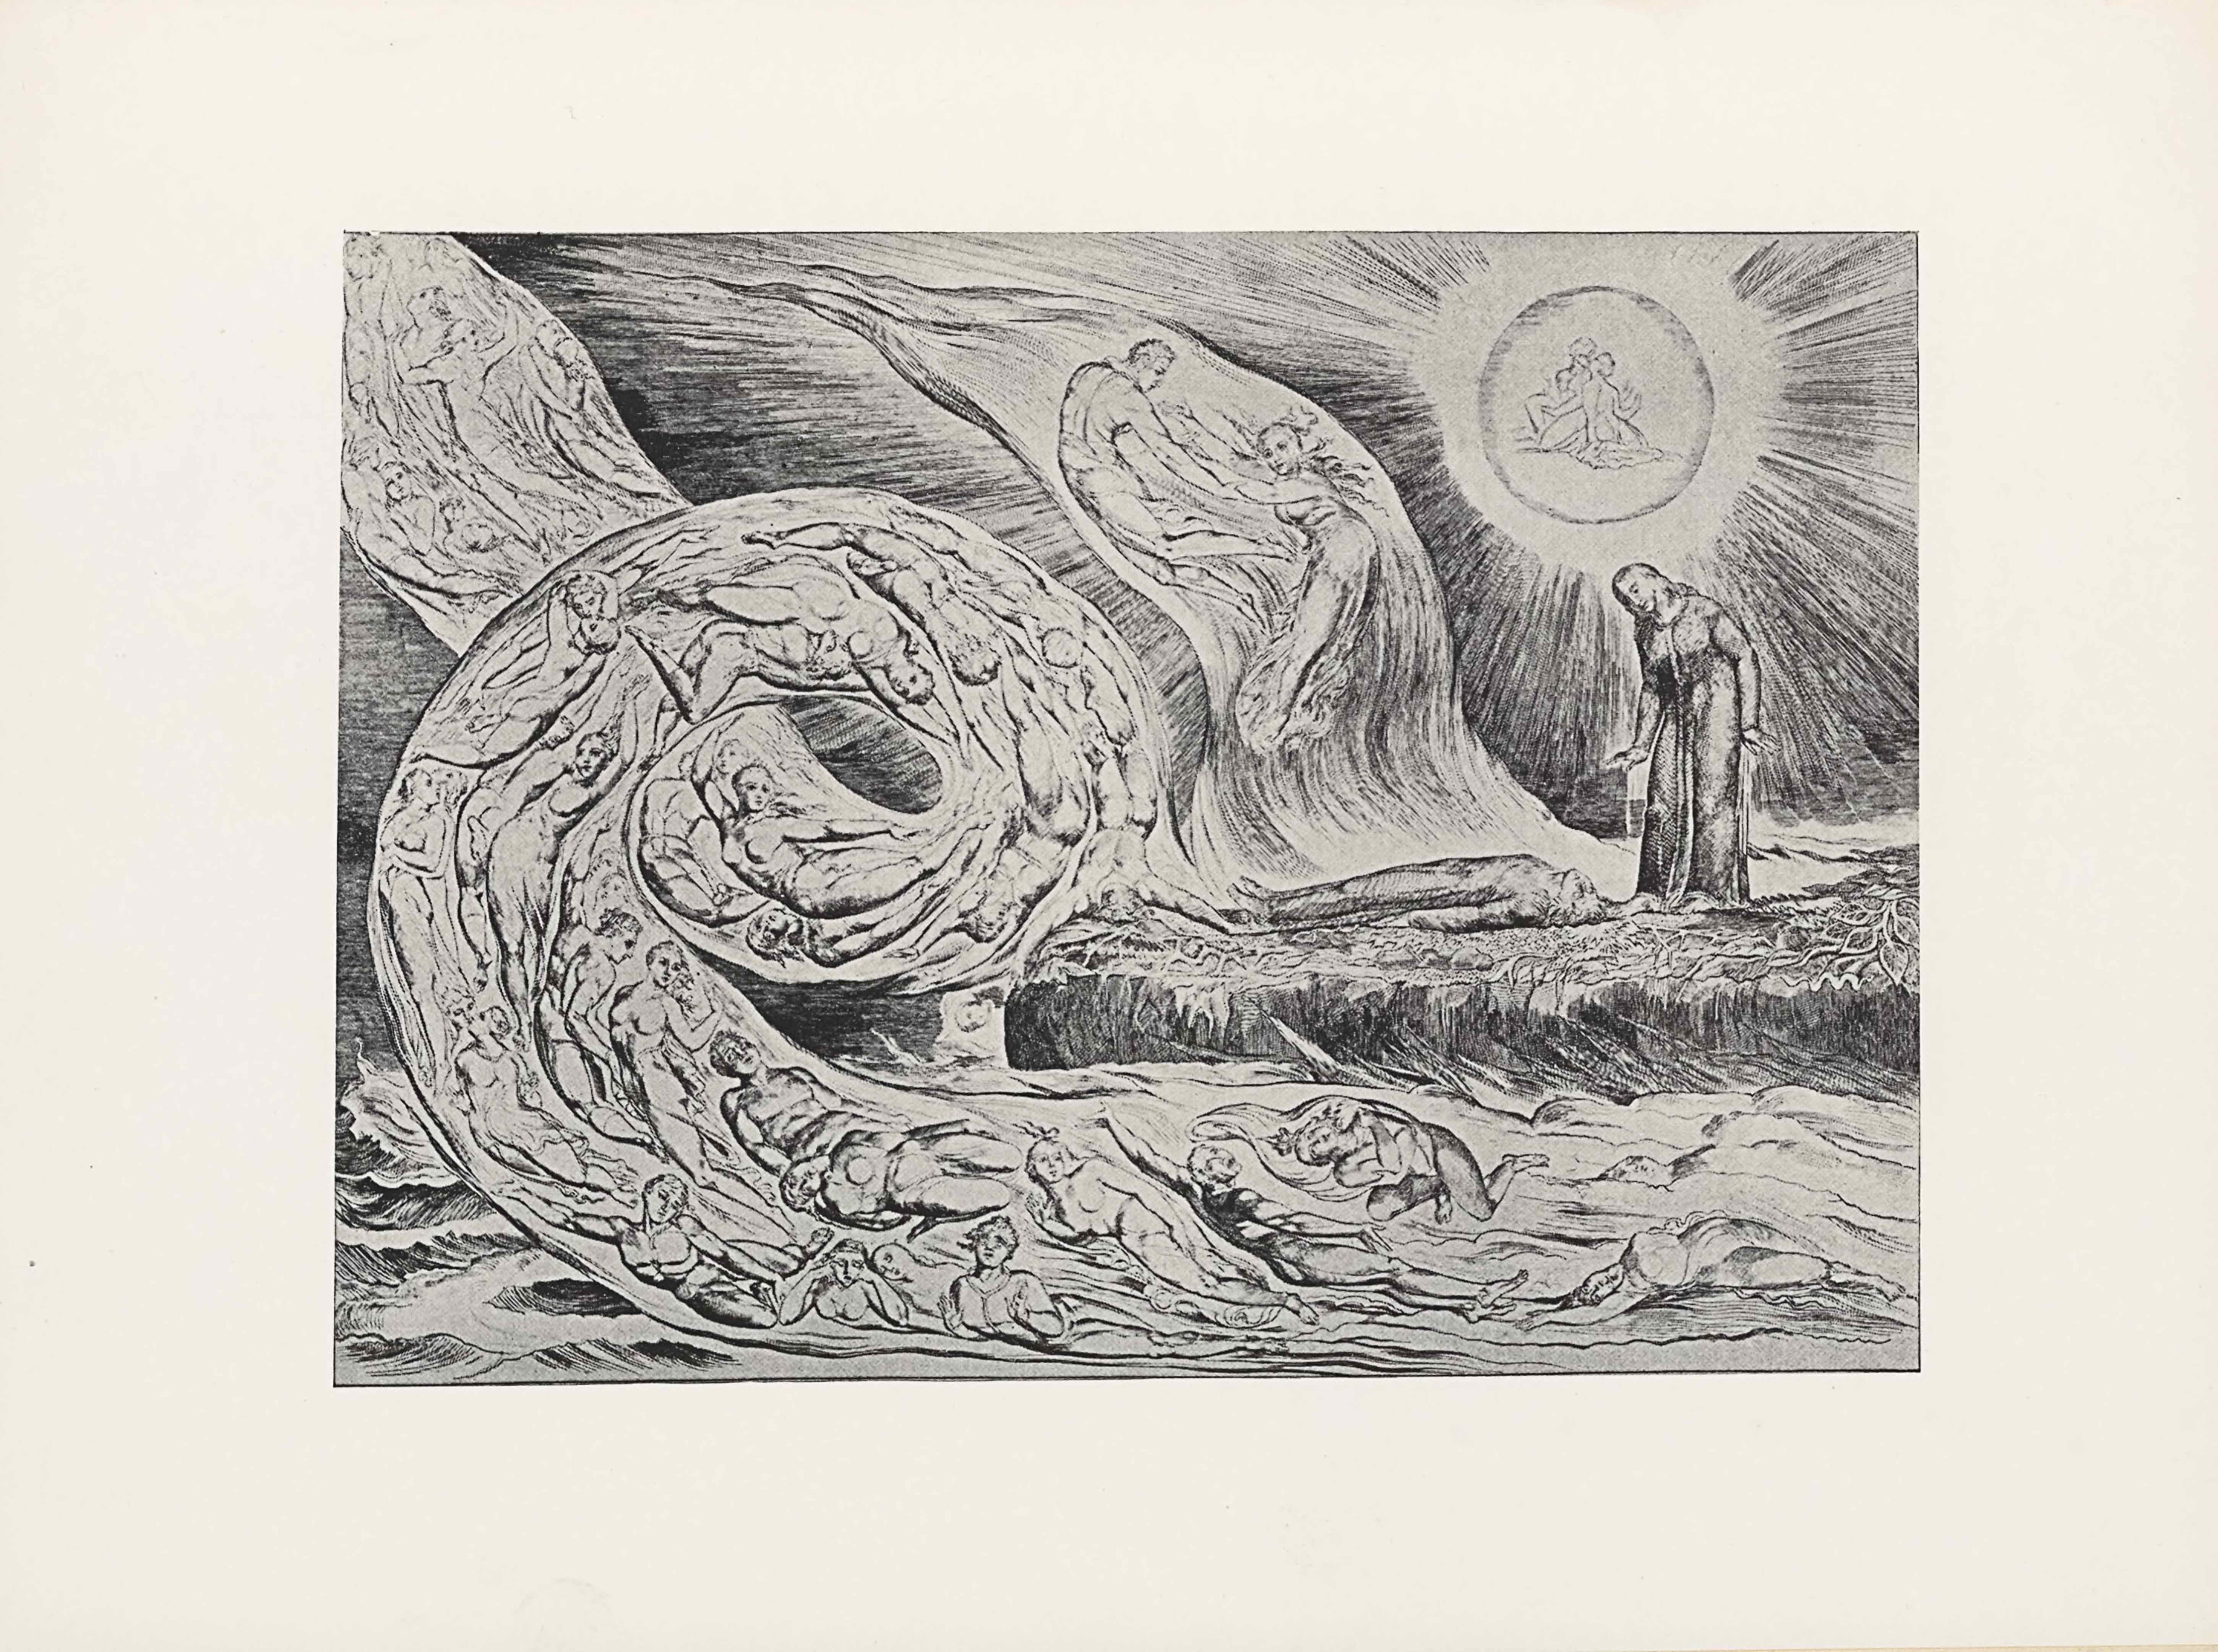 This halftone reproduction of a steel-plate engraving by William Blake is in landscape orientation. The image shows a scene from Dante’s Inferno, in which the poet, Dante, sees the shades of the adulterous lovers, Paolo and Francesca, in the first circle of hell, where the damned writhe in endless torment. These three figures form the centre of the composition. Dante is positioned In the mid-ground to the right of centre on a piece of rocky land jutting out into a sea. He is wearing a long robe and has long hair; his hands are out to the side, palms down. He stands facing the viewer with his body slightly turned to the left of the page, and bent down at the waist. He is looking down at a body that lies horizontally at his feet. The body is lying prone with its arms at its sides and face to the sky. The land on which he stands is covered by some water from the crashing waves. Dante turns to the shades of Paolo and Francesca, in an enclosed flame beside and above him. Paolo, is on the left and Francesca on the right; they are holding each other in their arms. Francesca, the woman, is wearing a flowing dress and Paolo, the man, appears to be naked. To the right of the flame that encloses them, and above the figure of Dante, in the top right corner, is a bright sun-like circle with two figures inside of it. Within the circle is one faceless figure seated on the left and another seated to the right; they appear to be on a rock. Dark lines extend out to the left and right, and then extend down to the sealine and up to the top of the page, forming the sky. The foreground of the image is comprised of swirls of flame containing naked bodies of the damned above the sea [of brimstone].